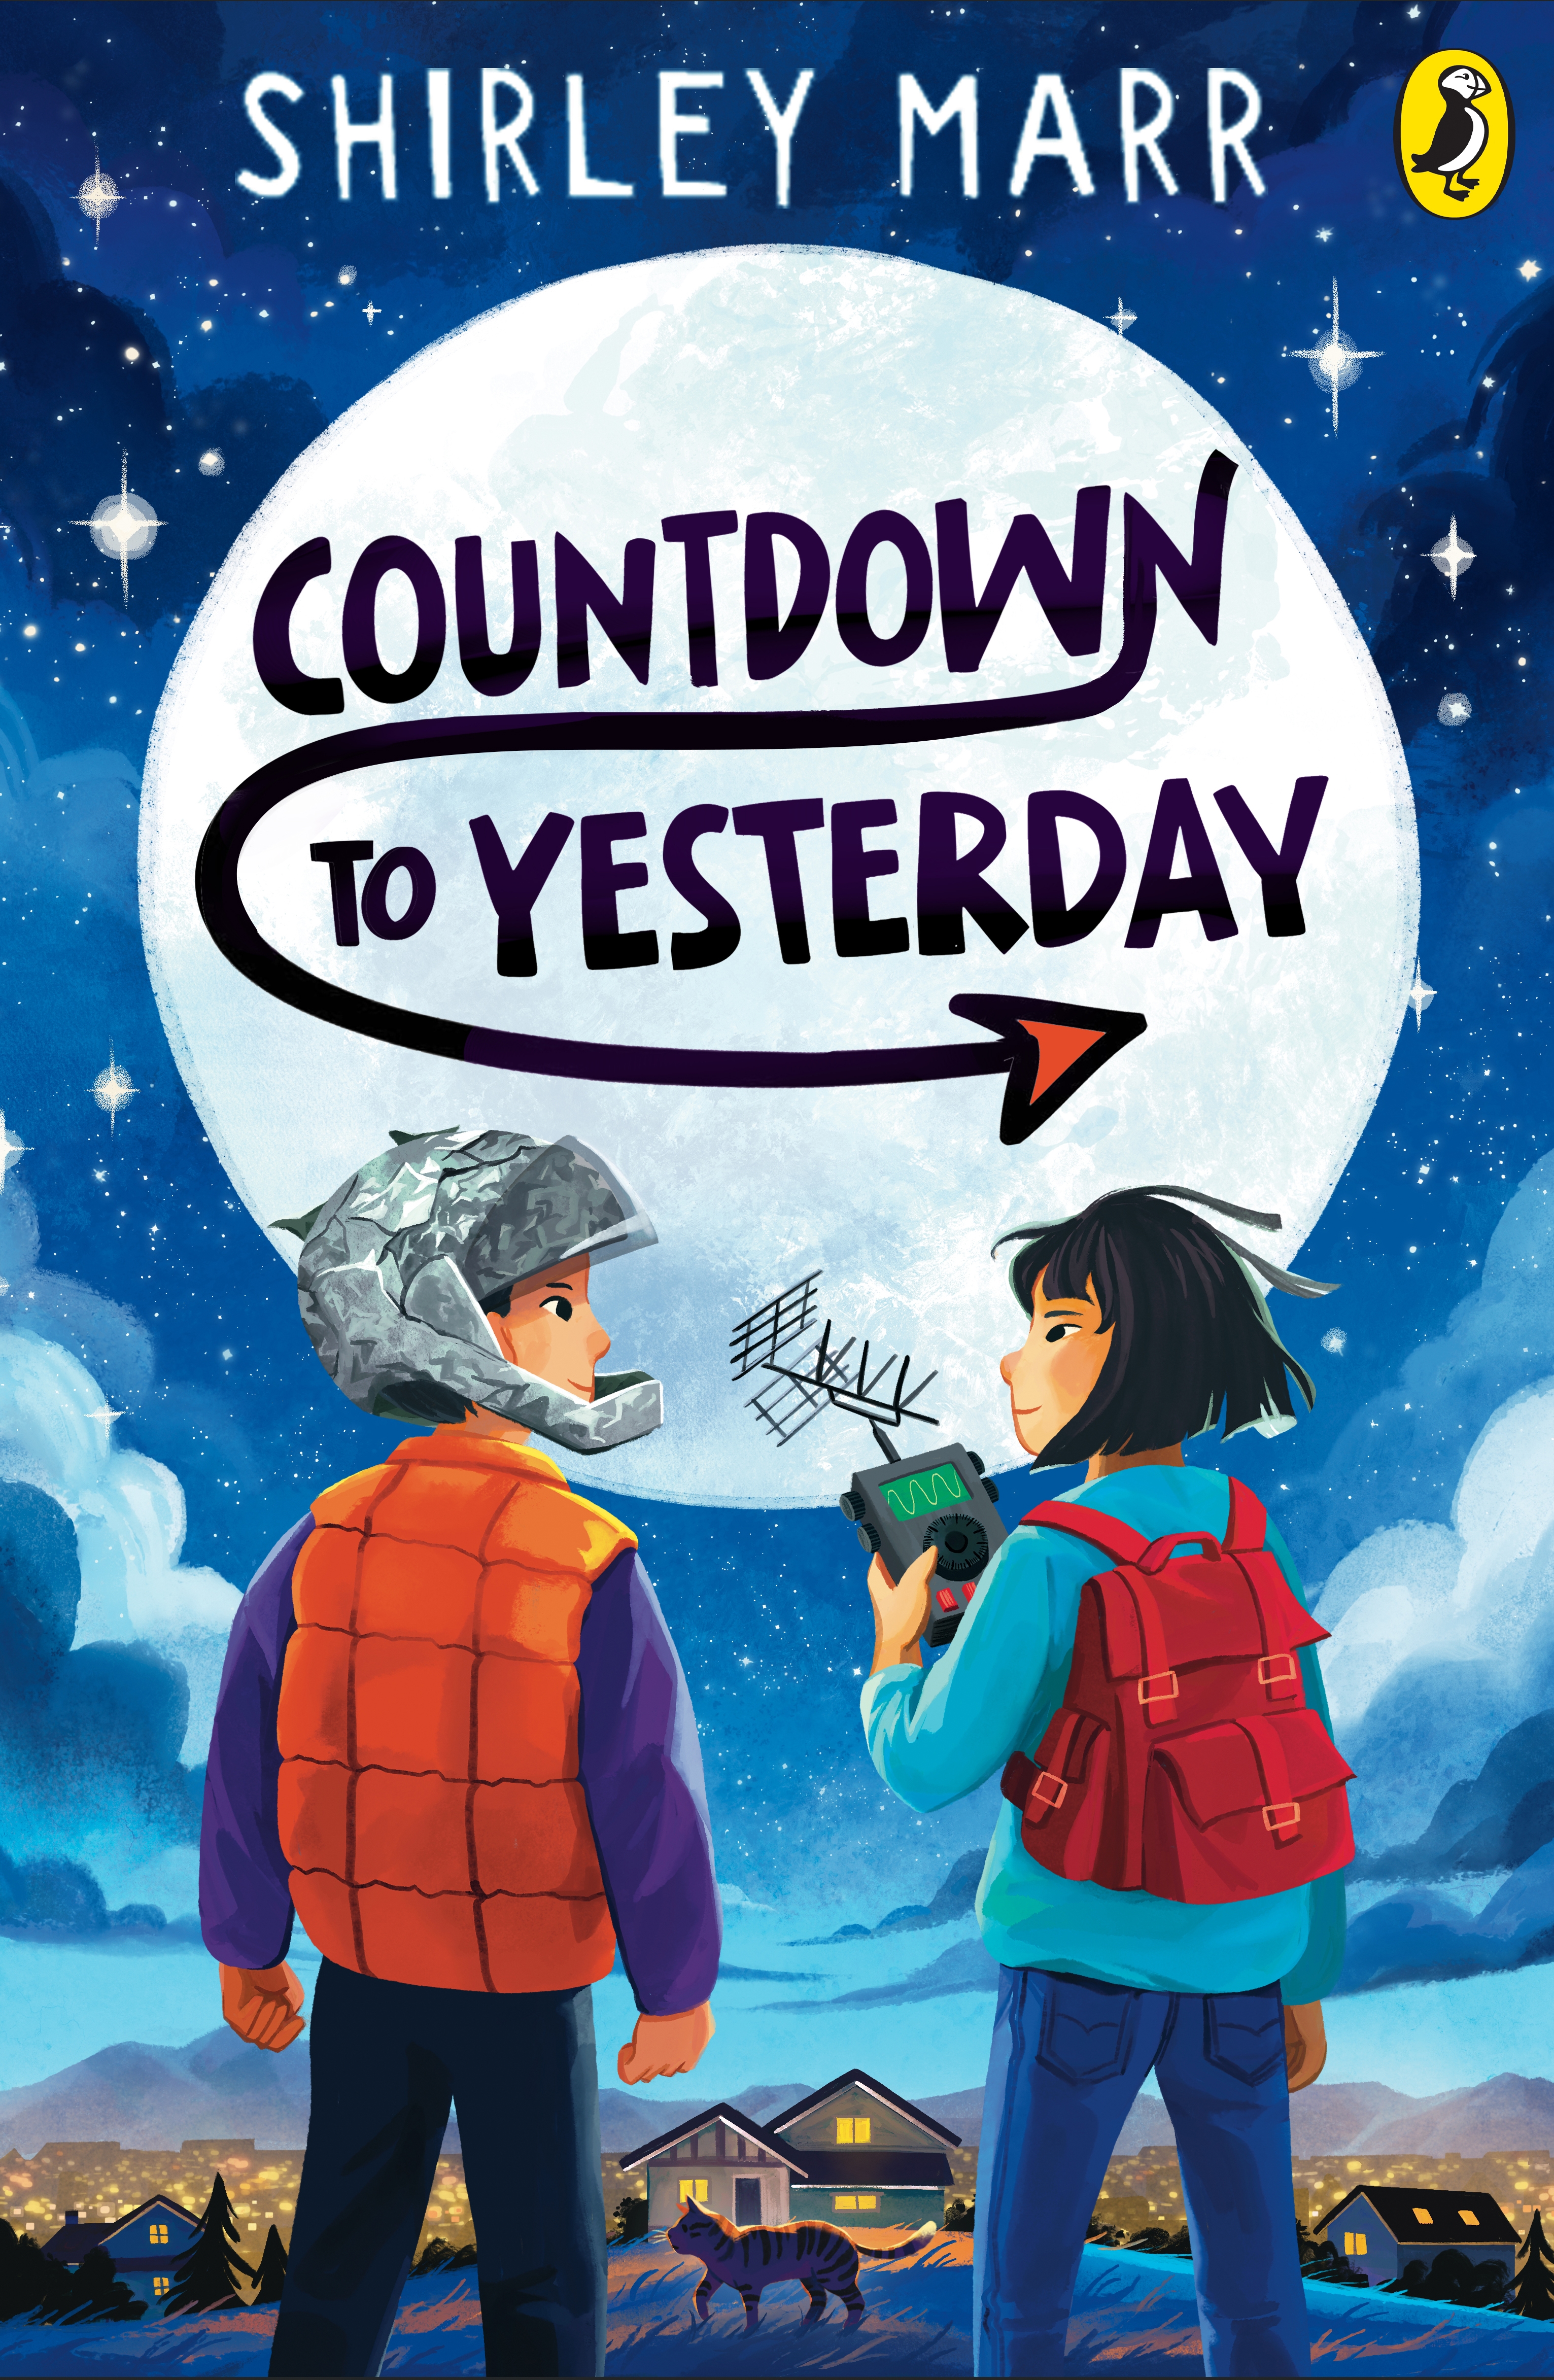 The cover of a children's novel: Countdown to Yesterday by Shirley Marr